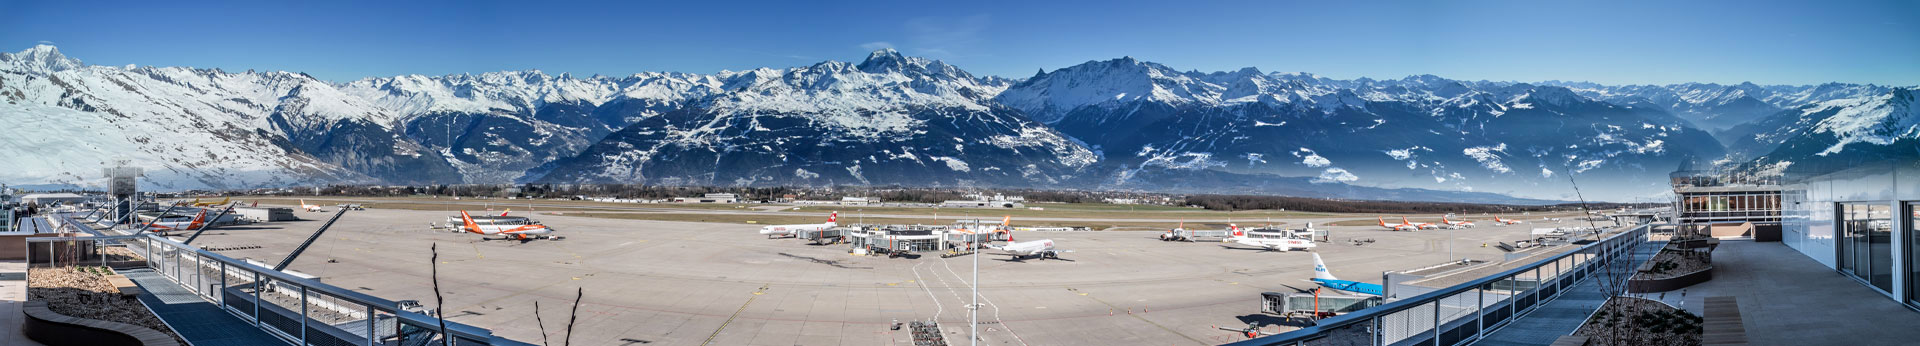 Geneva airport transfer or train station by taxi to Val d'Isere